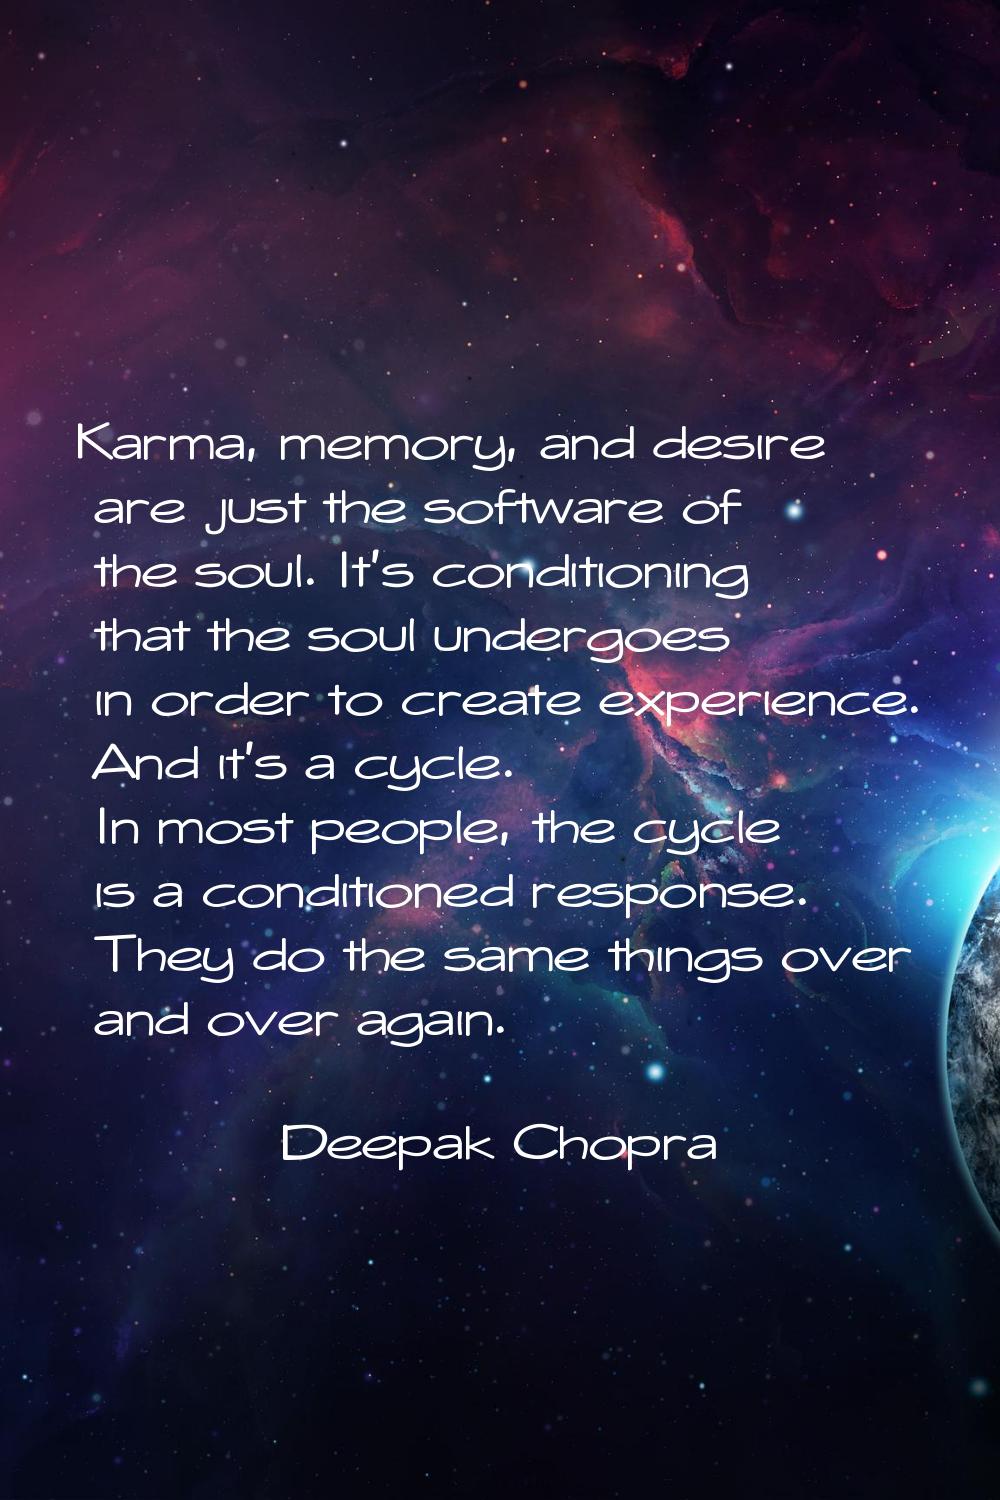 Karma, memory, and desire are just the software of the soul. It's conditioning that the soul underg